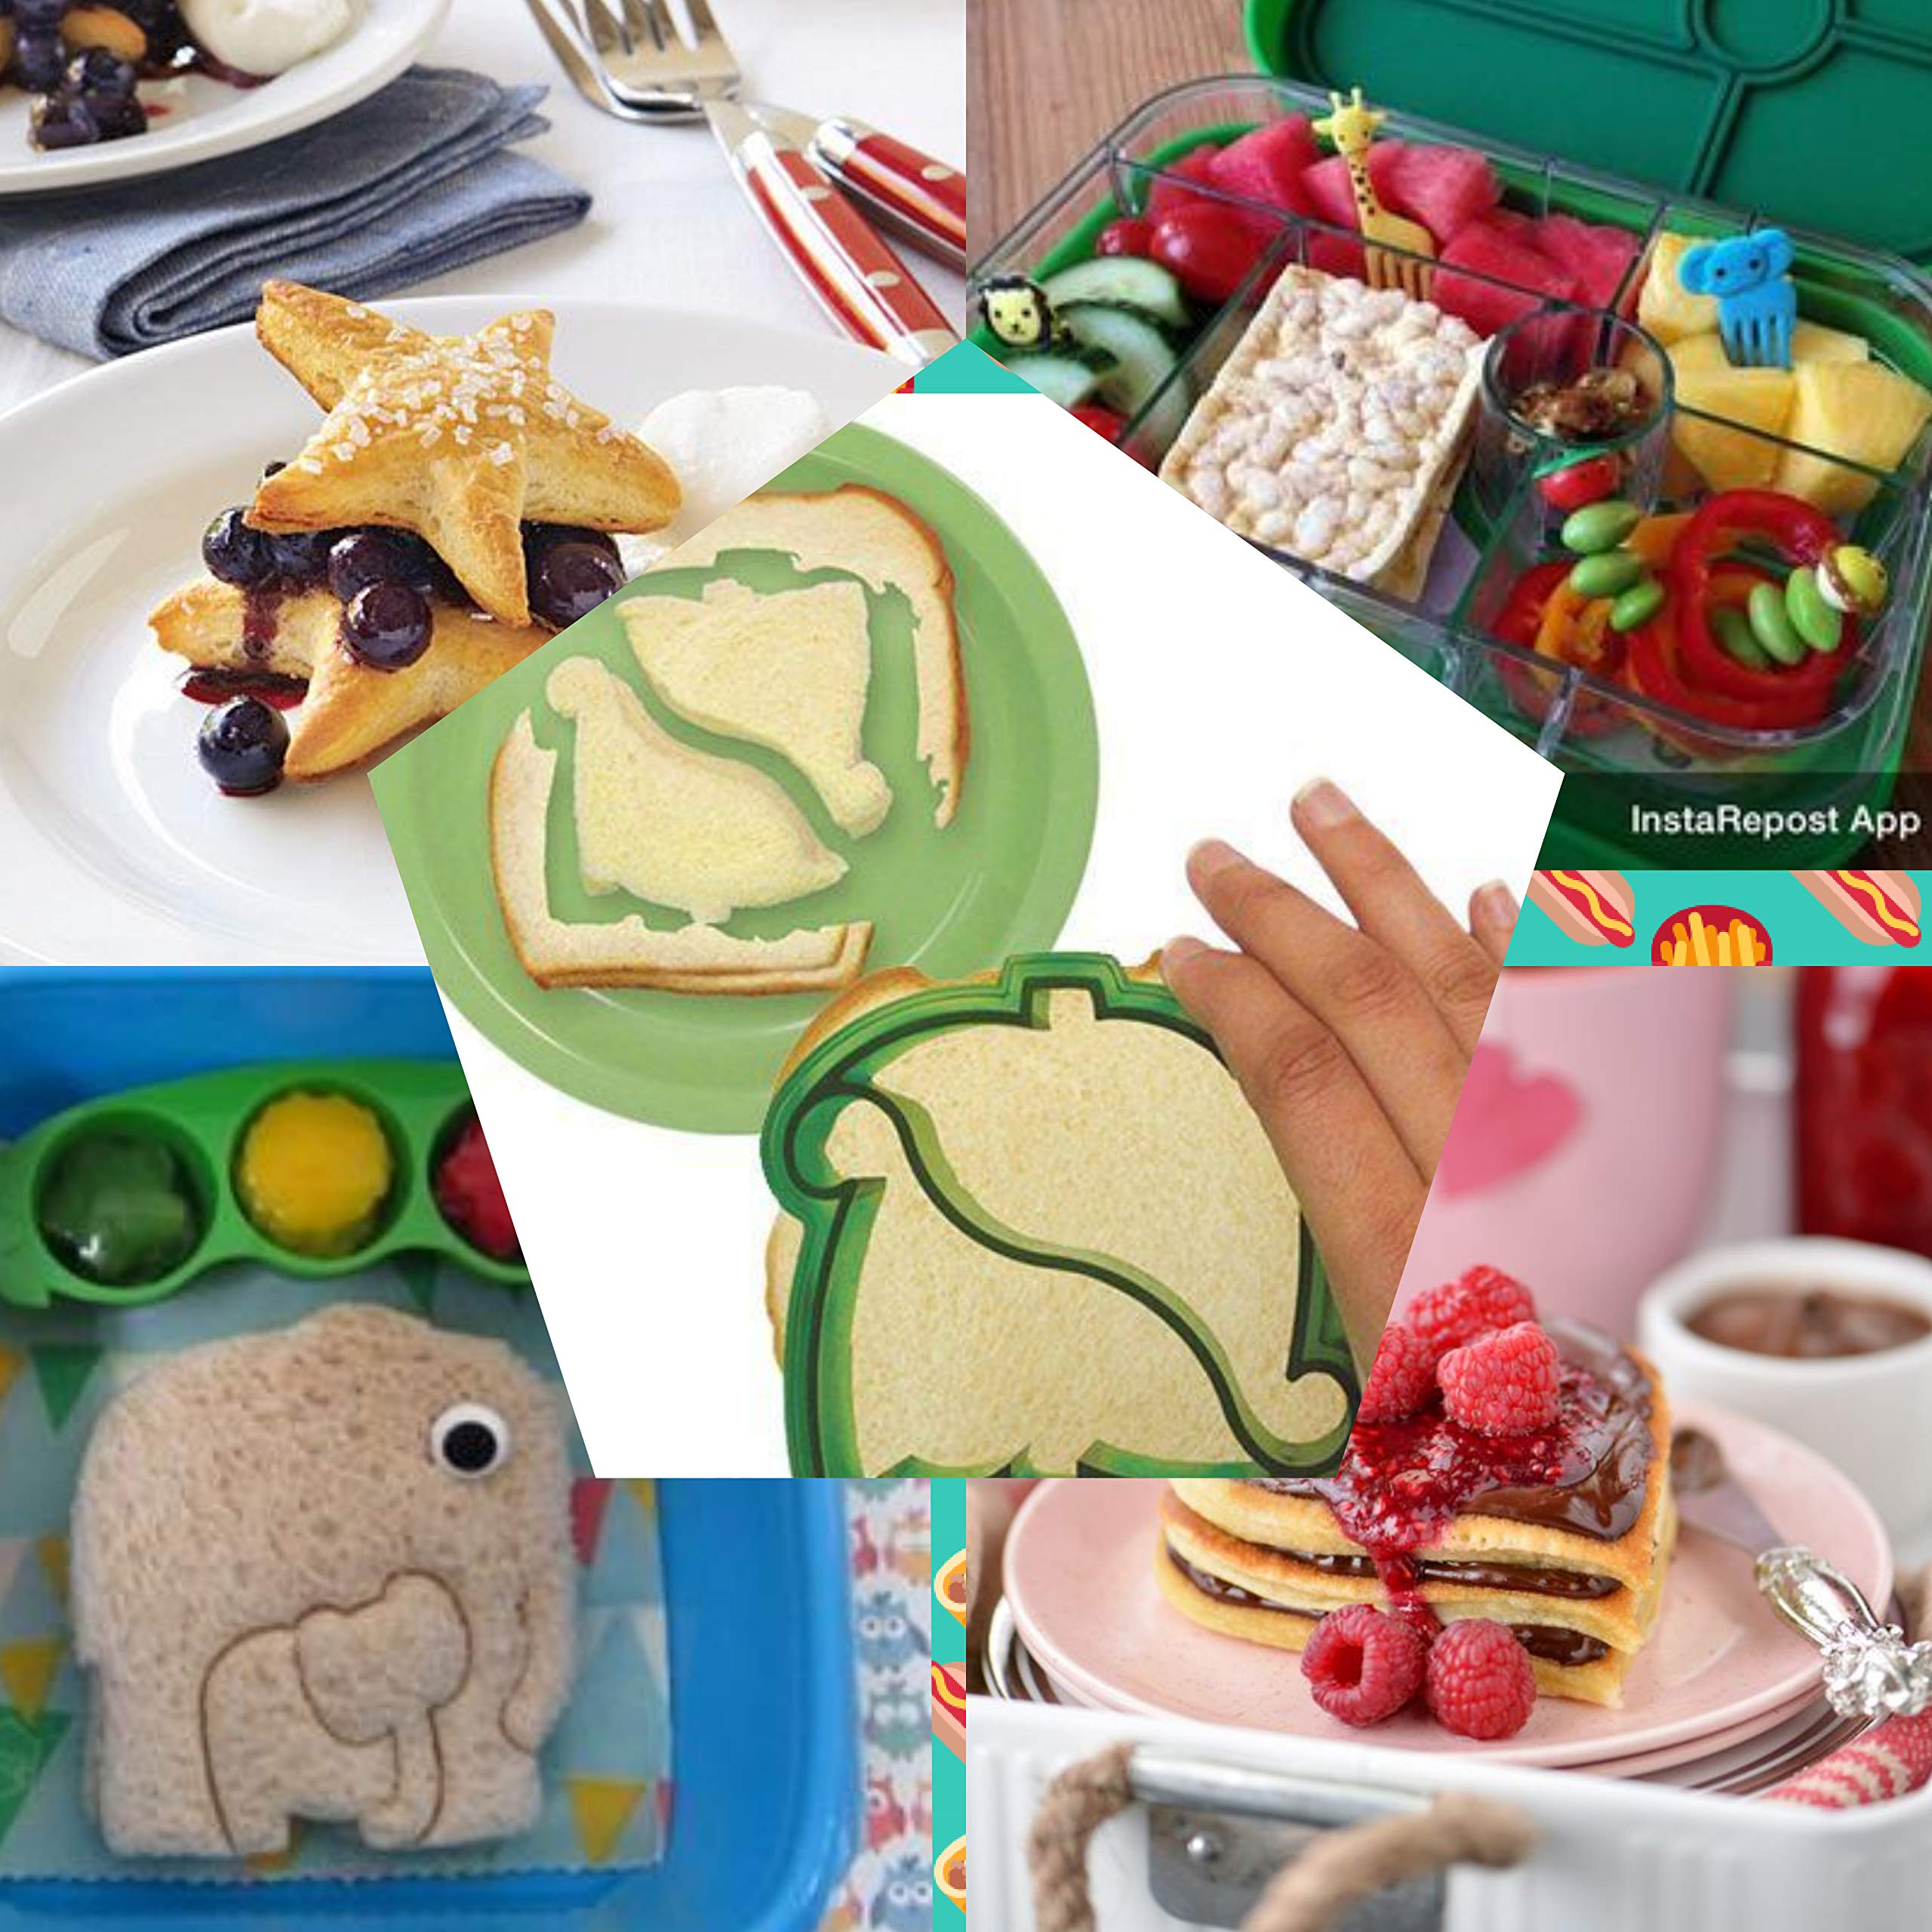 Chickoo 31pcs Sandwich Cutters for Kids Lunch - Turn Vegetables, Fruits, Cheese, Bread, Cakes, Cookies and Uncrustables Into Fun food - DIY add to Bento Box and Lunch Box for Toddlers Boys and Girls.